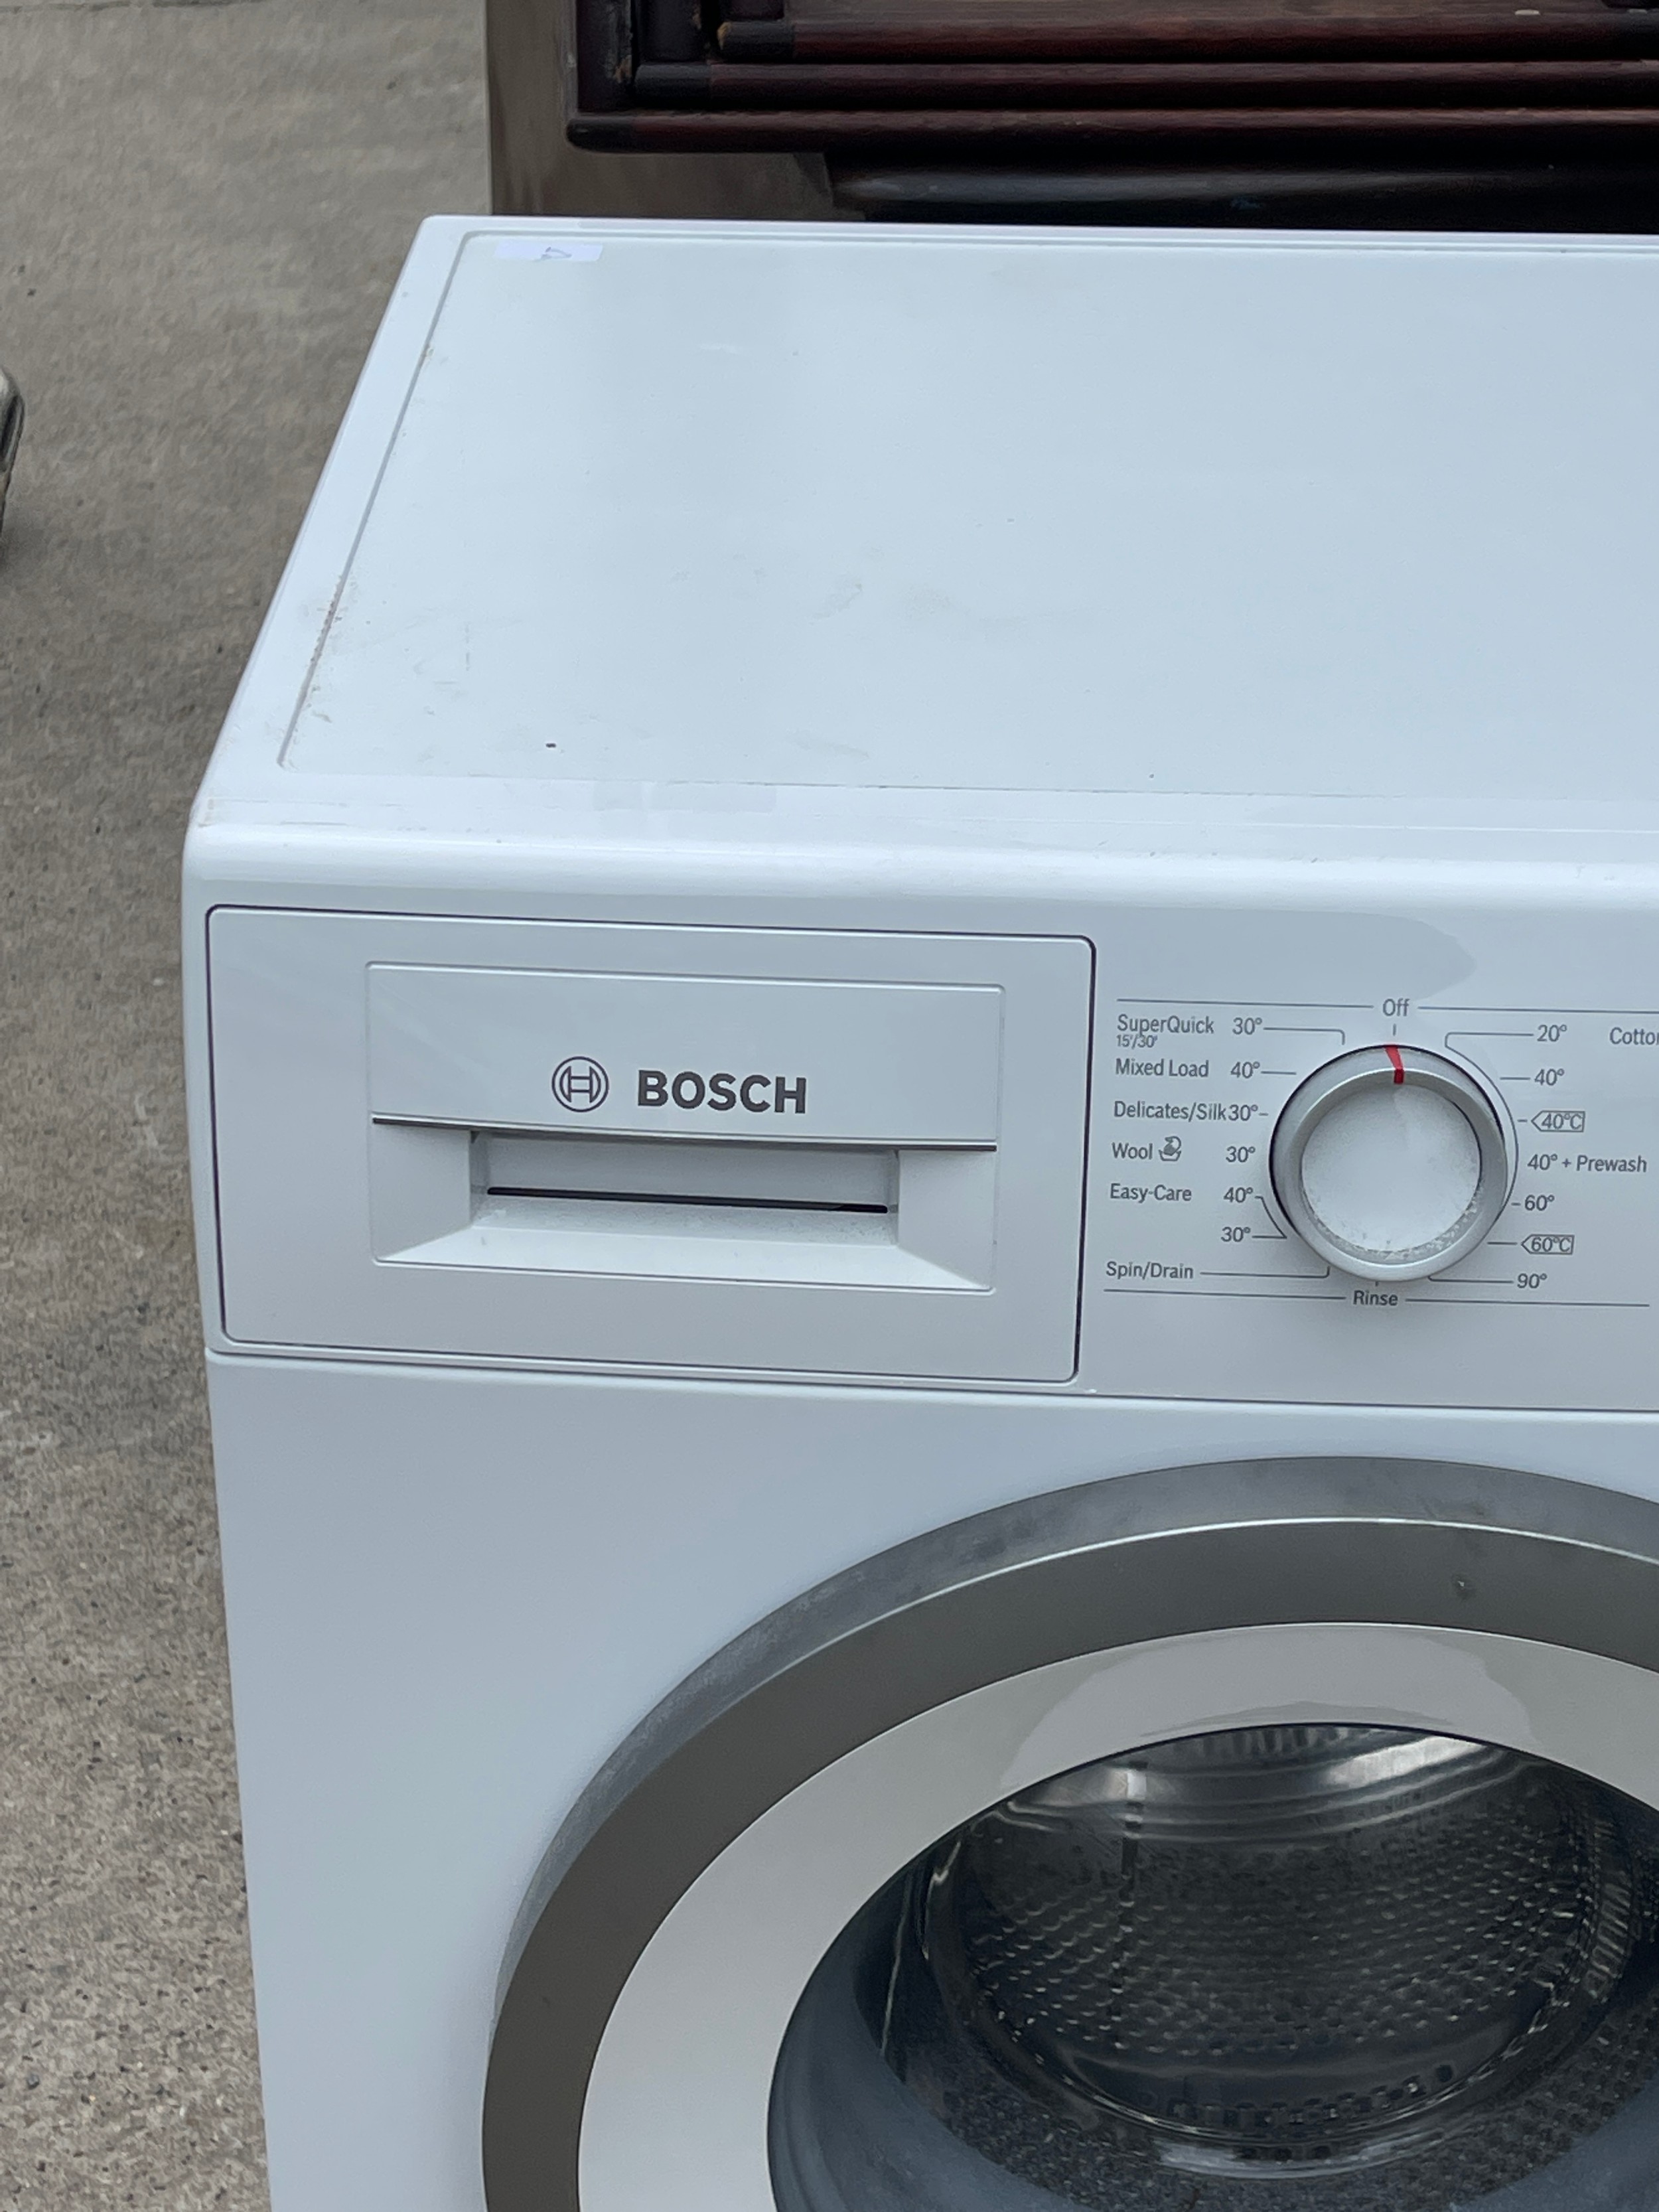 Bosch vario perfect series 4 washing machine - untested - Image 2 of 3